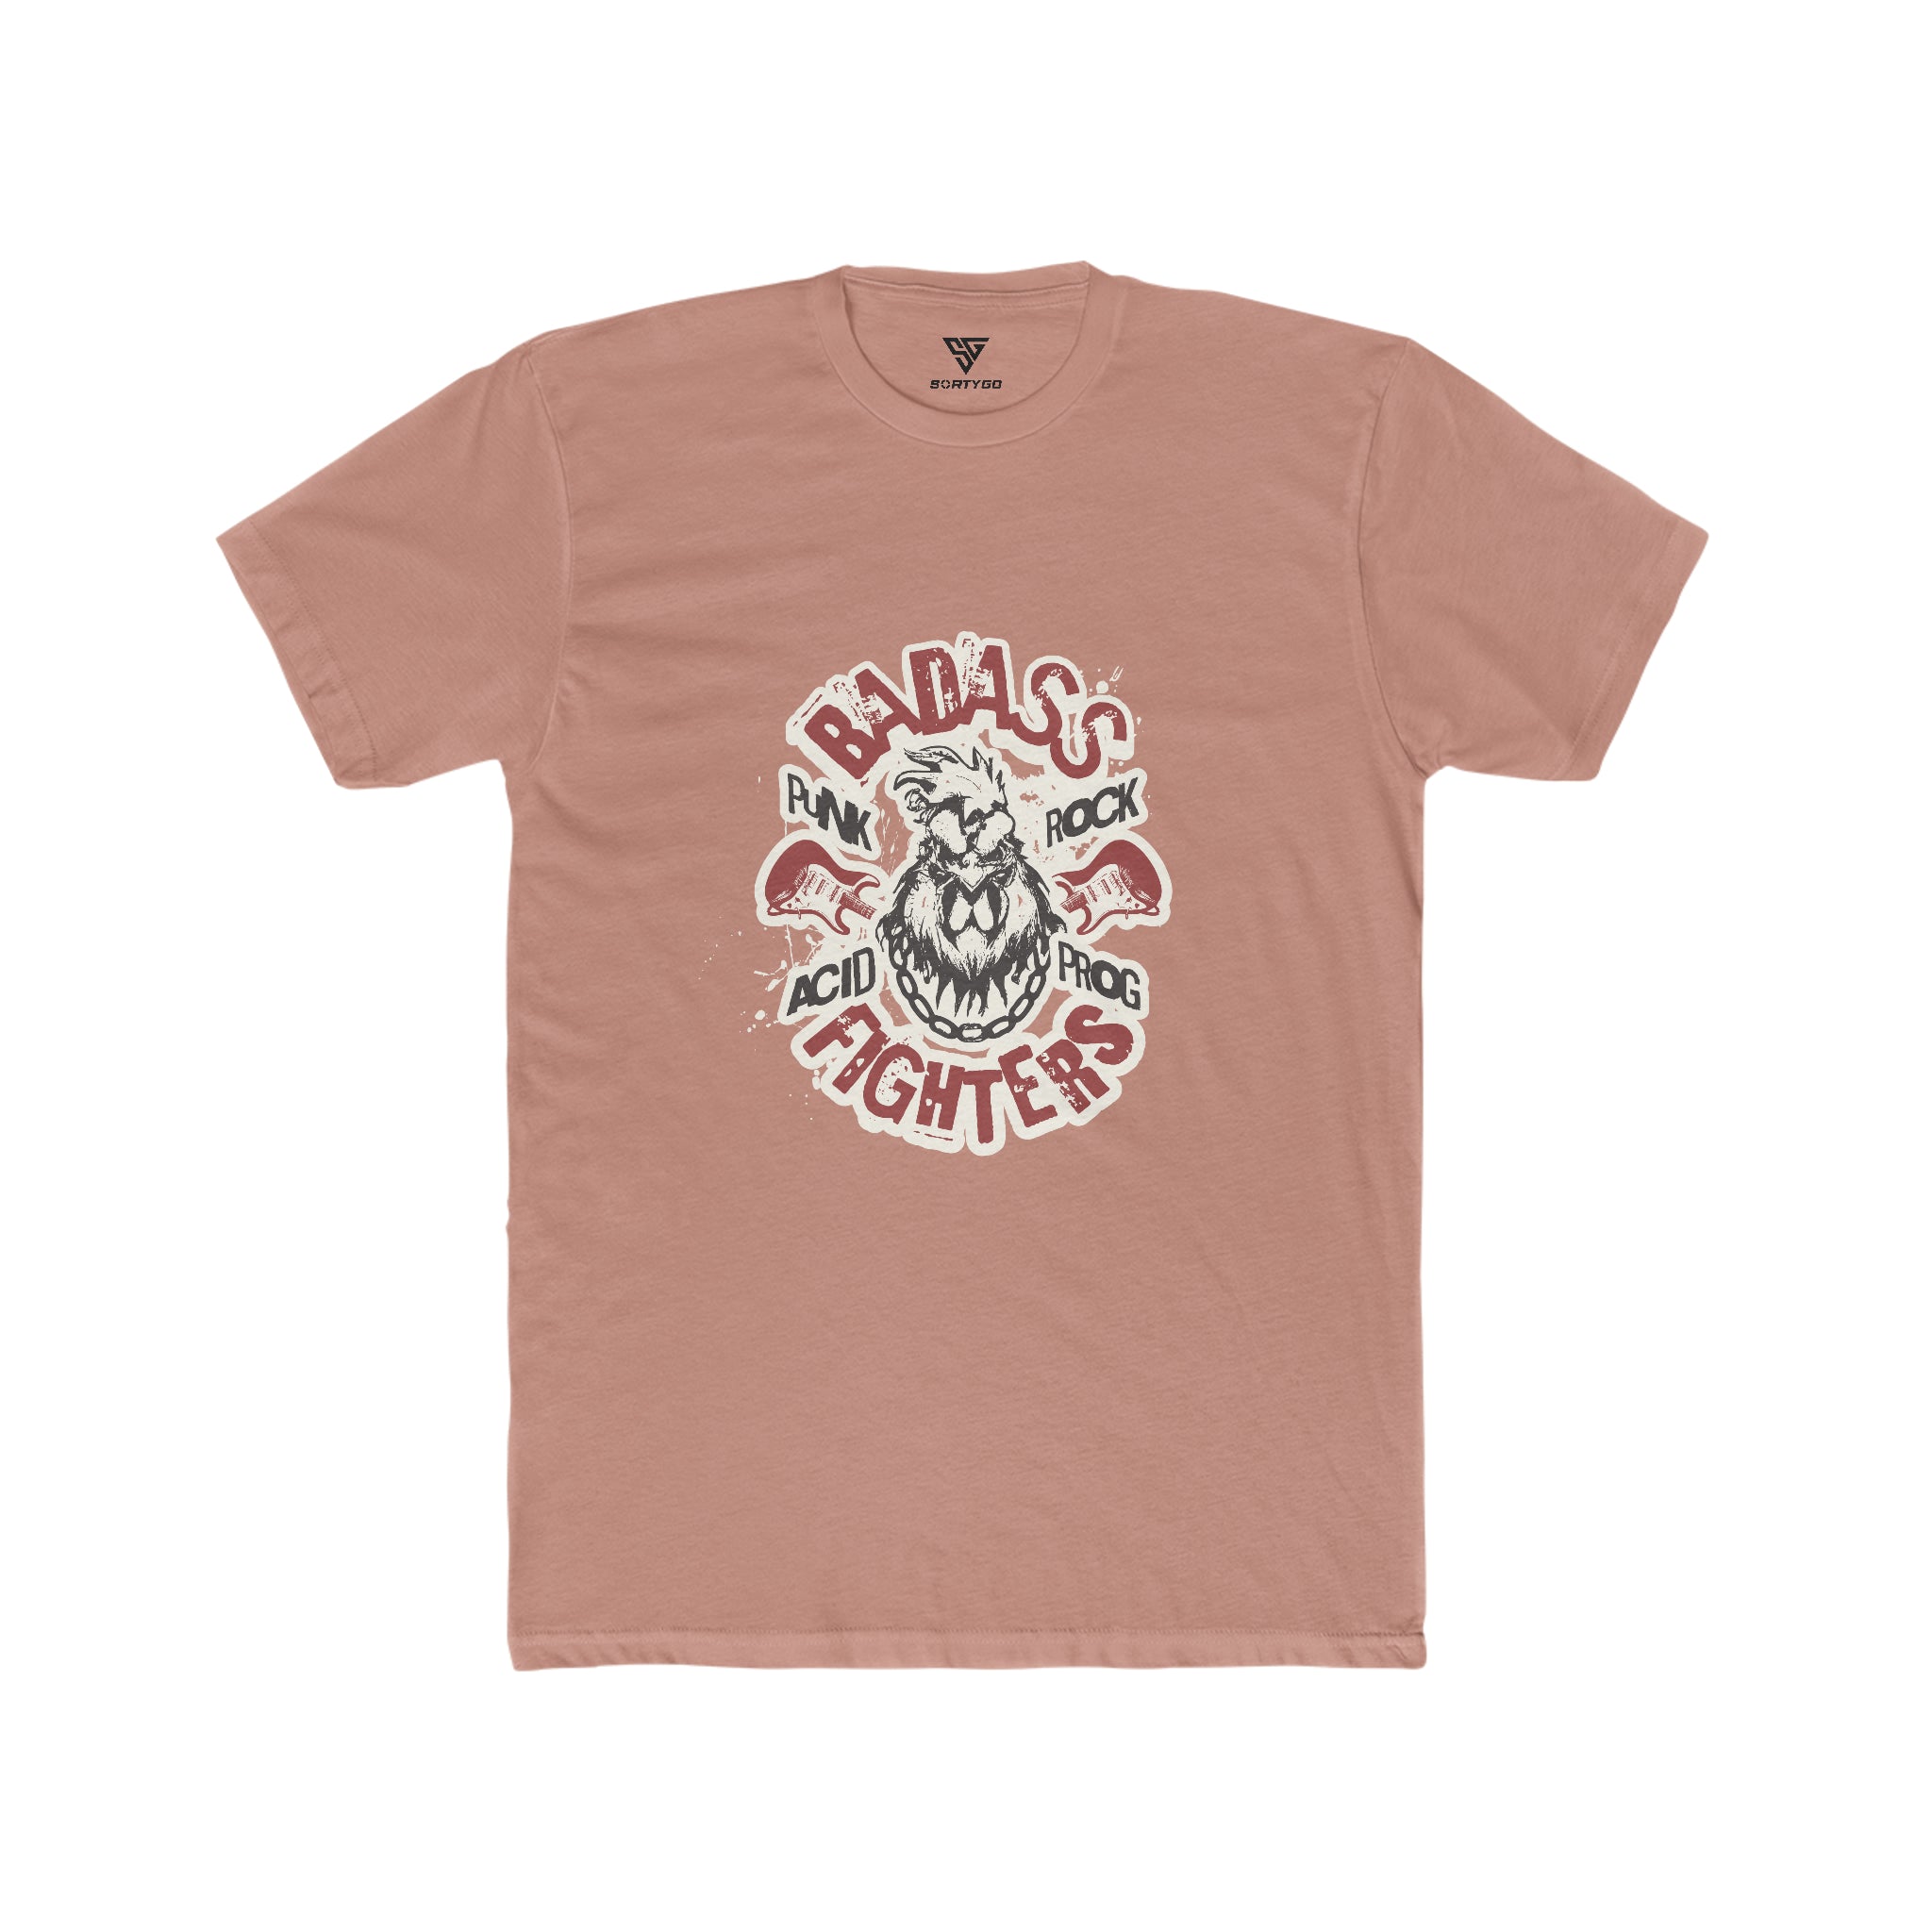 SORTYGO - Badass Fighters Men Fitted T-Shirt in Solid Desert Pink